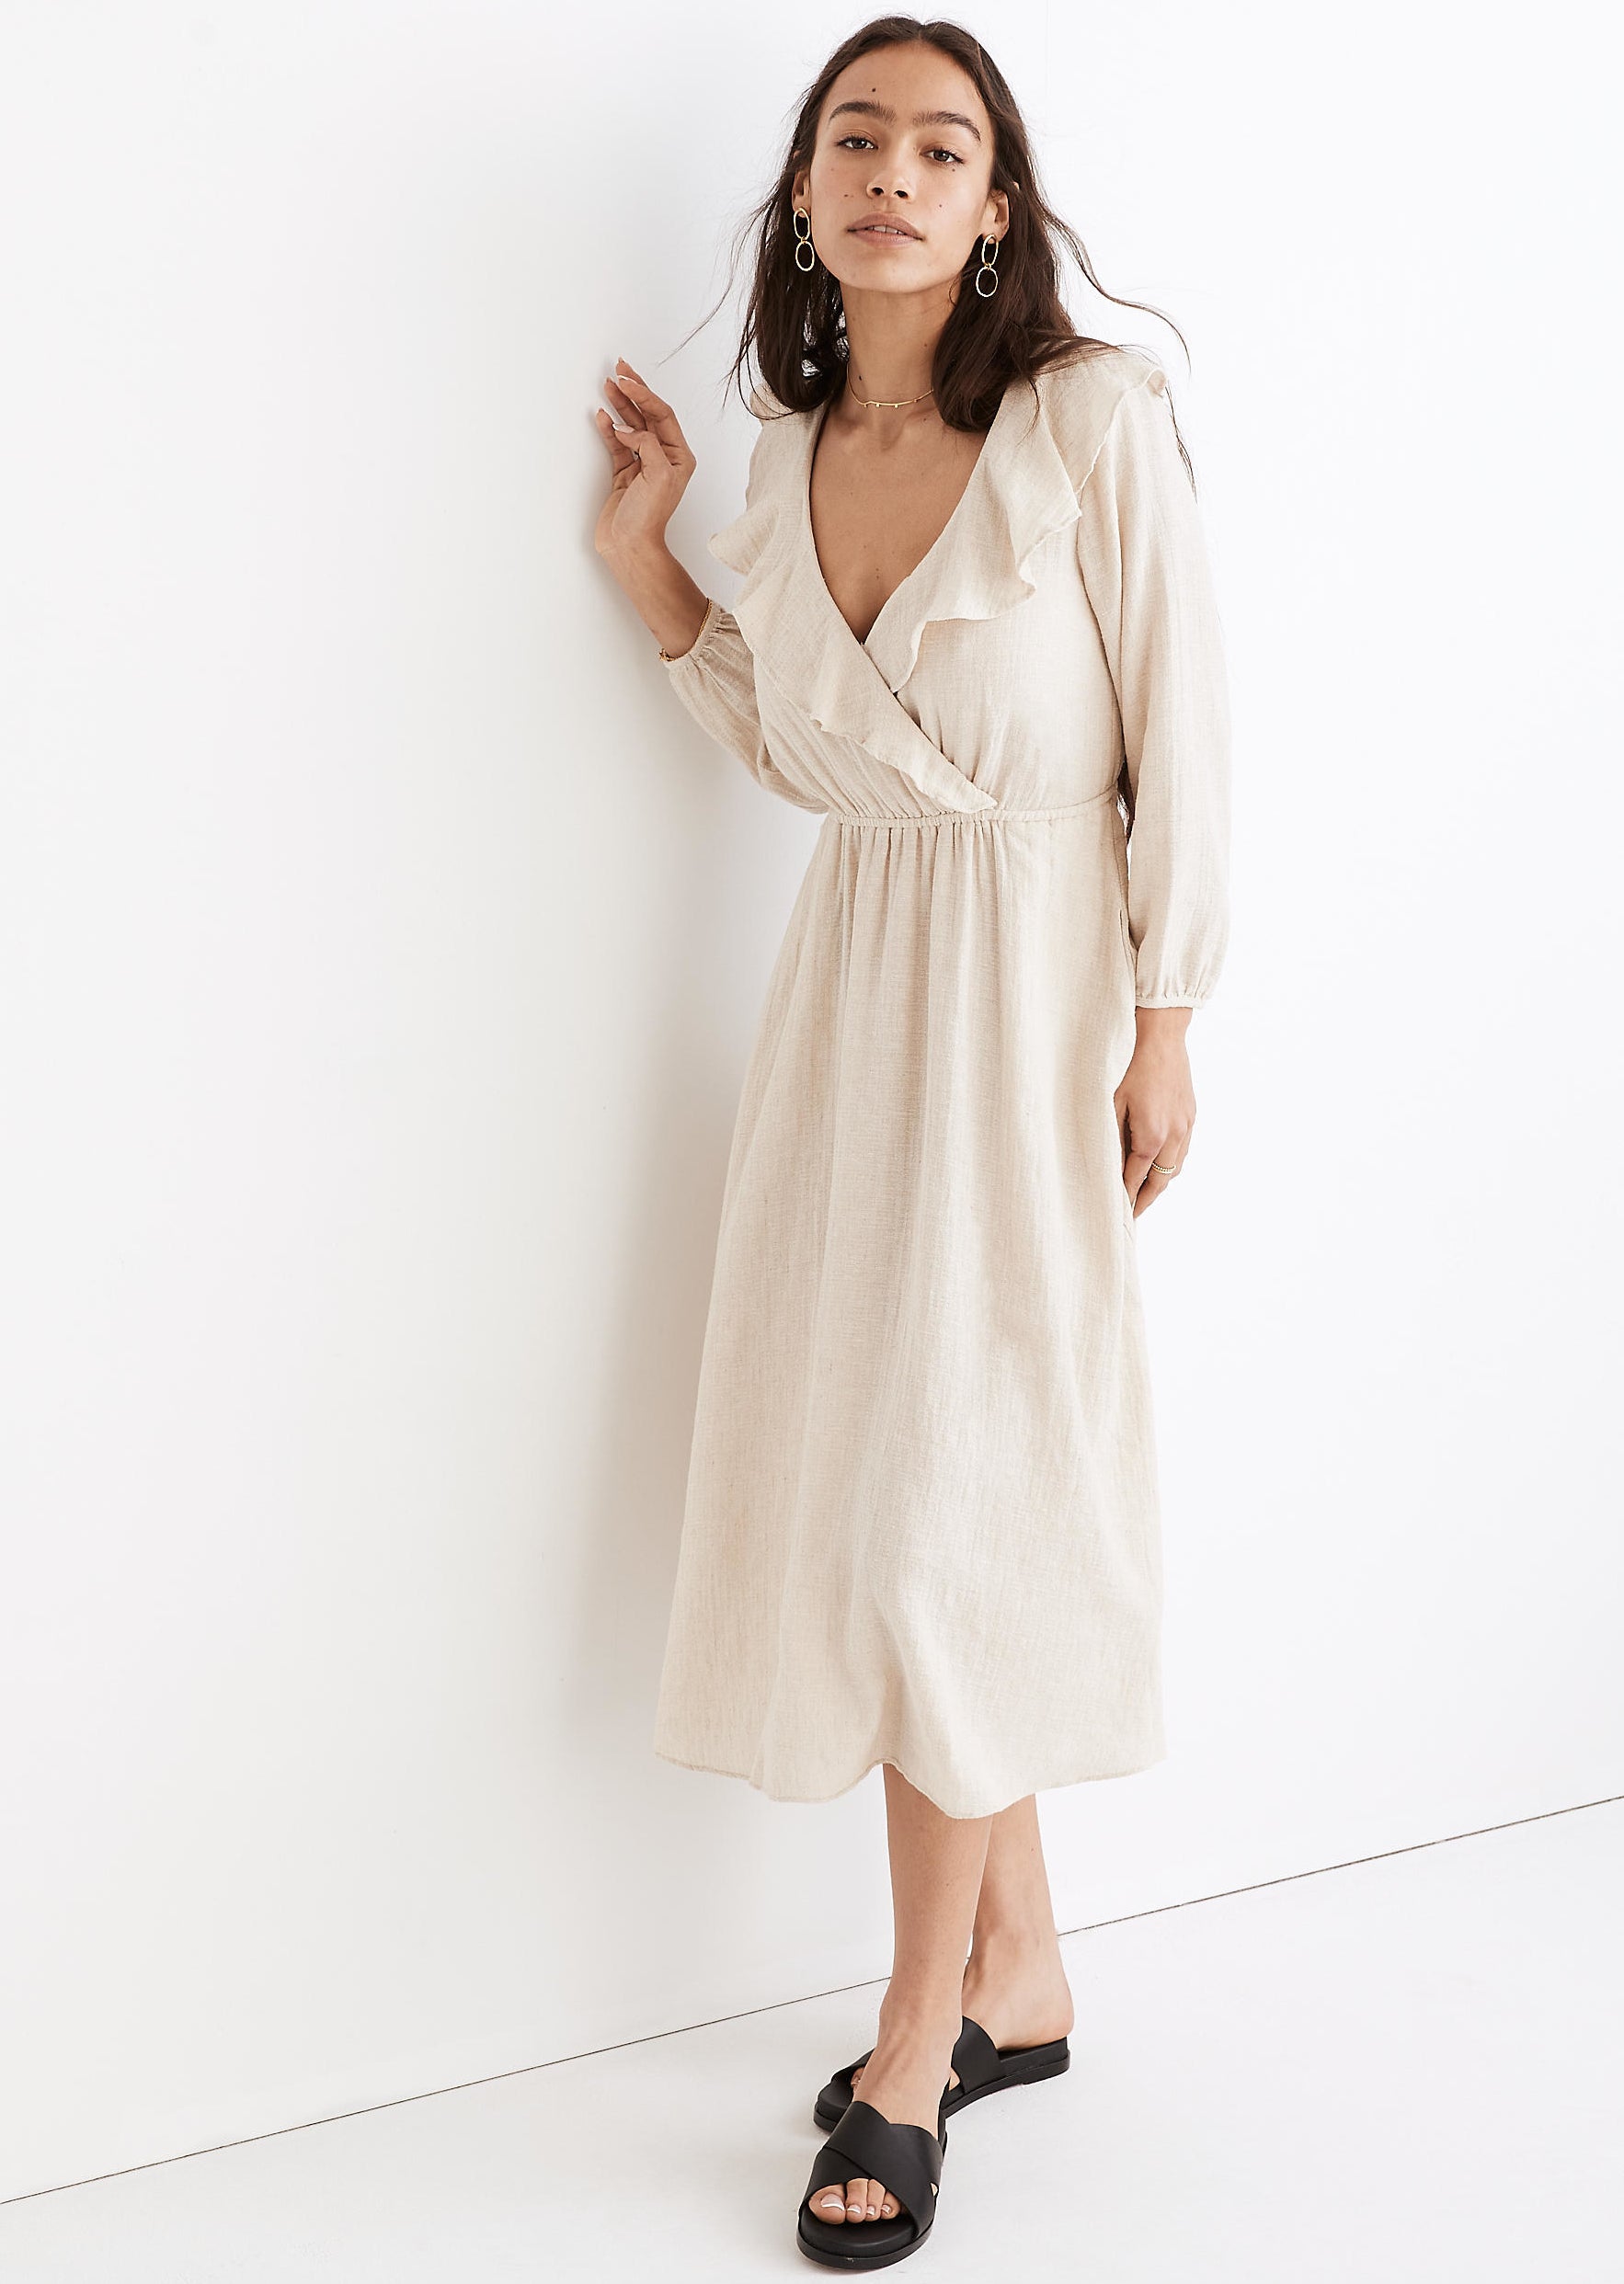 model in white v-neck midi dress with a layer of ruffles around the neckline and long sleeves with elastic at the wrists